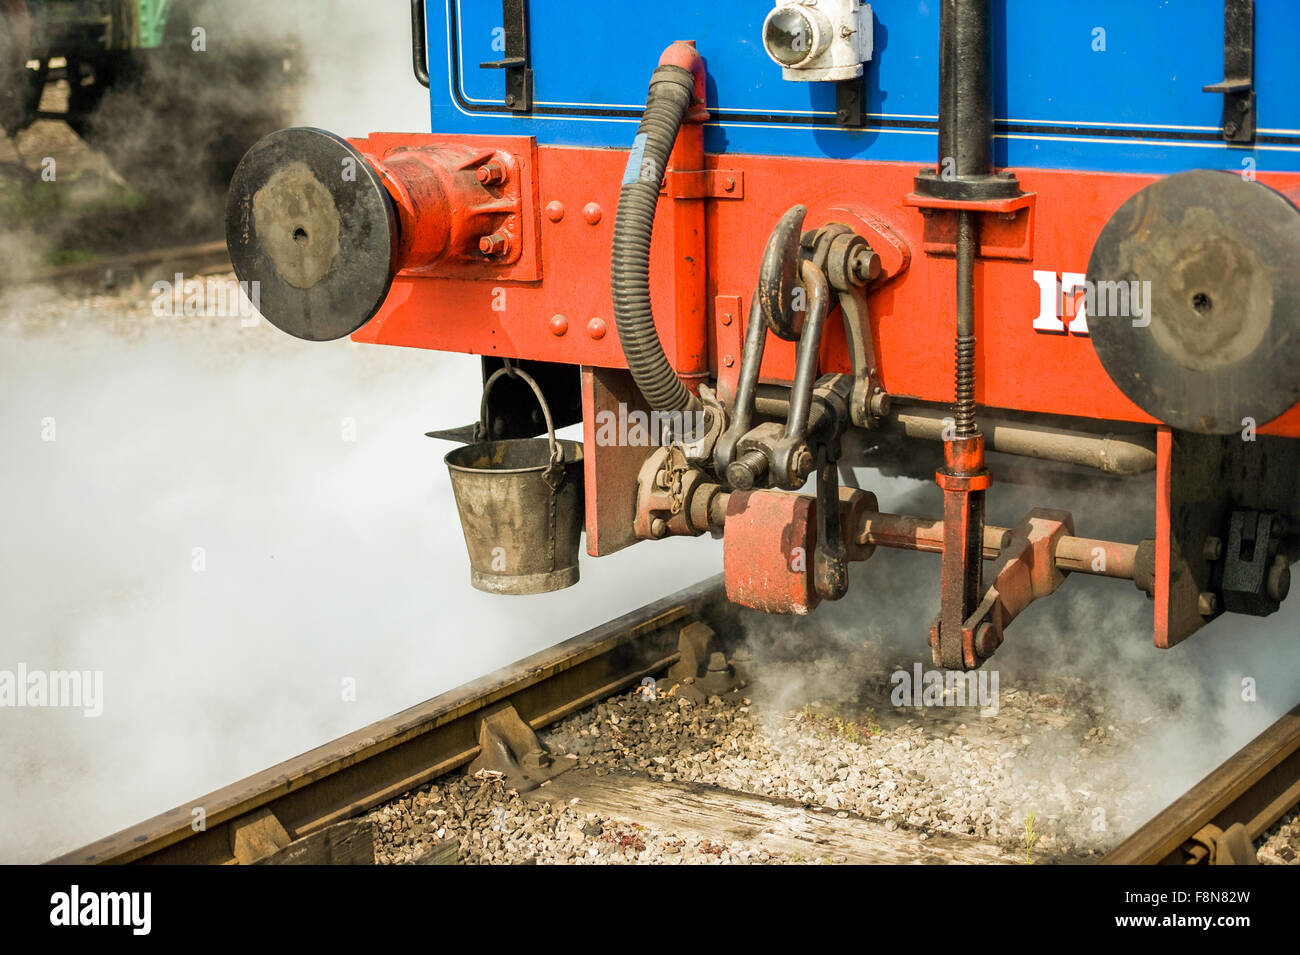 Train detail on railway track with steam Stock Photo